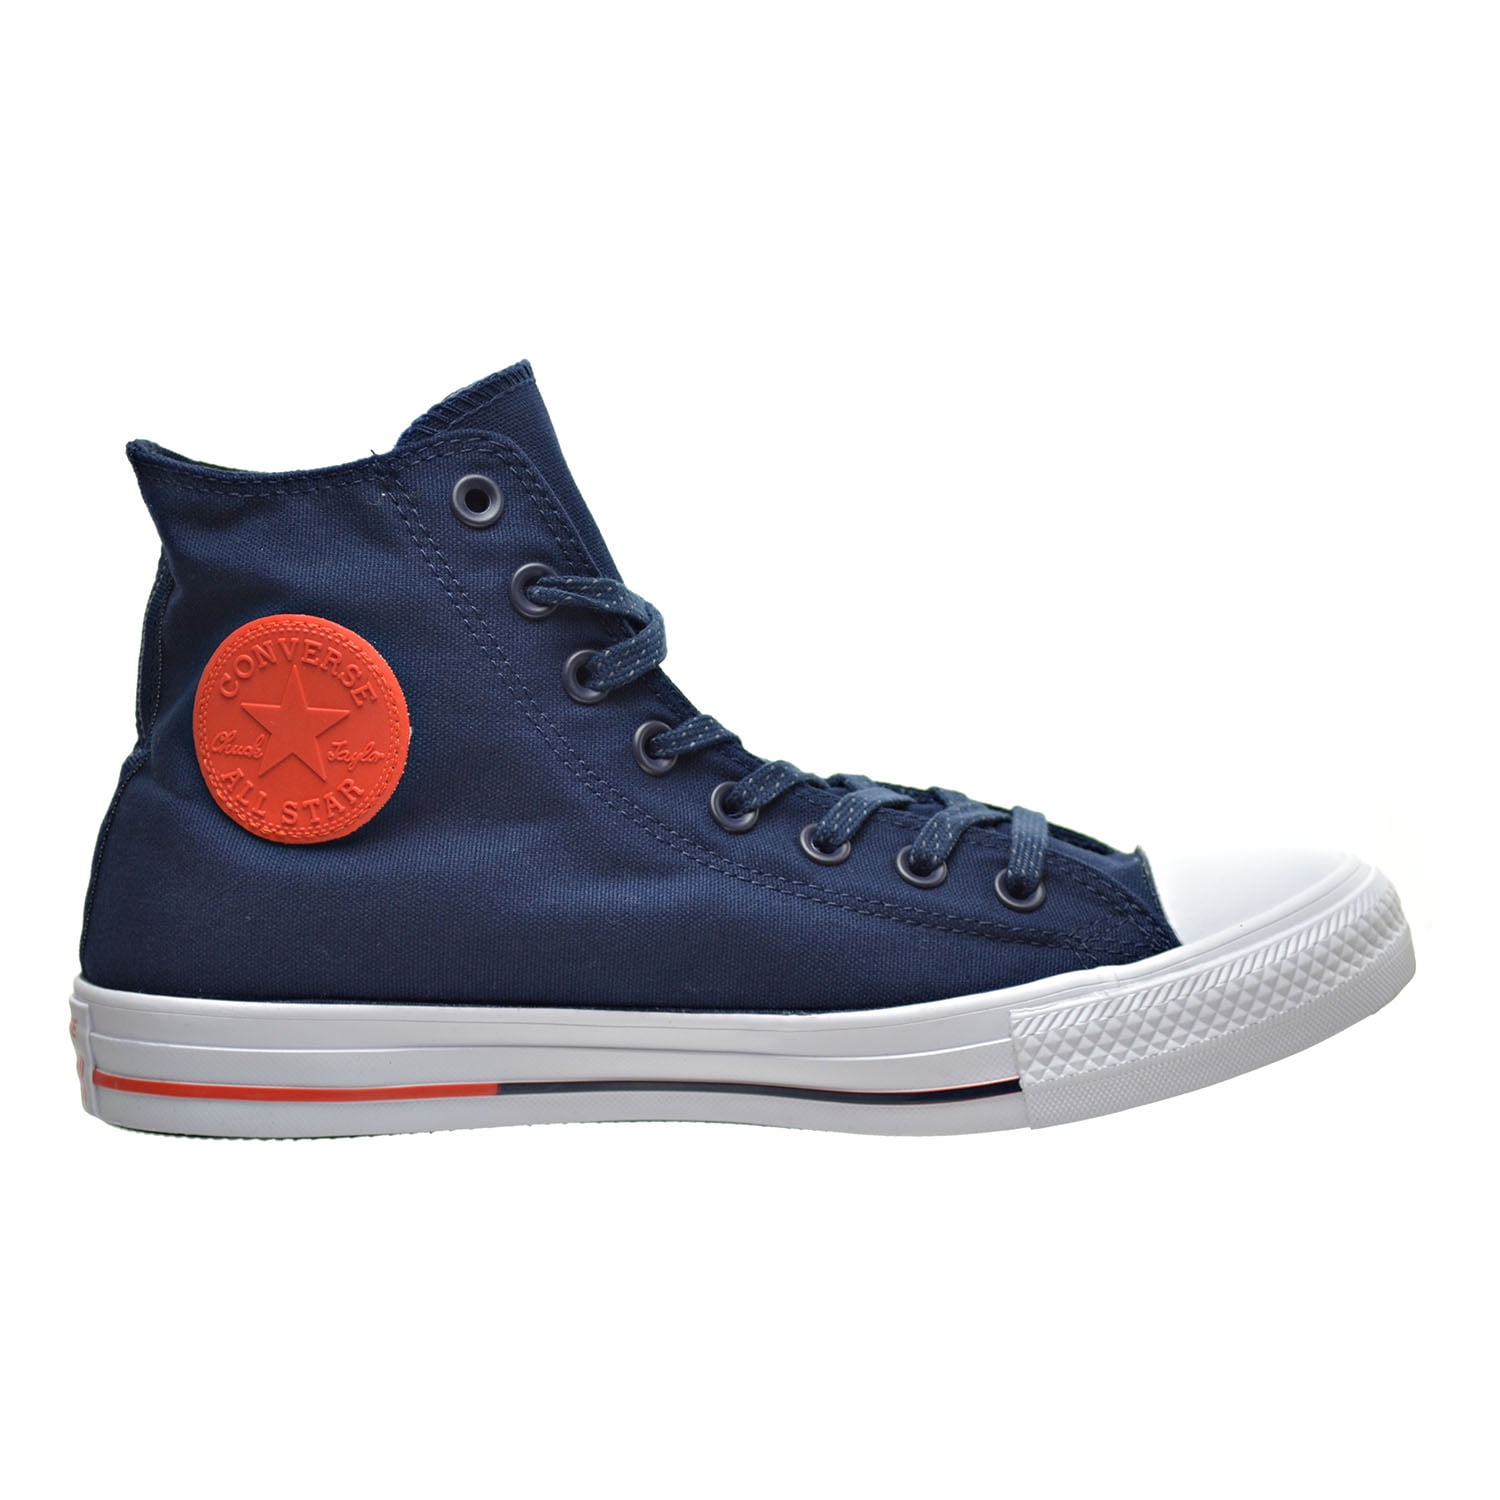 Converse Chuck Taylor All Star High unisex Shoes Obsidian/White 153793f -  